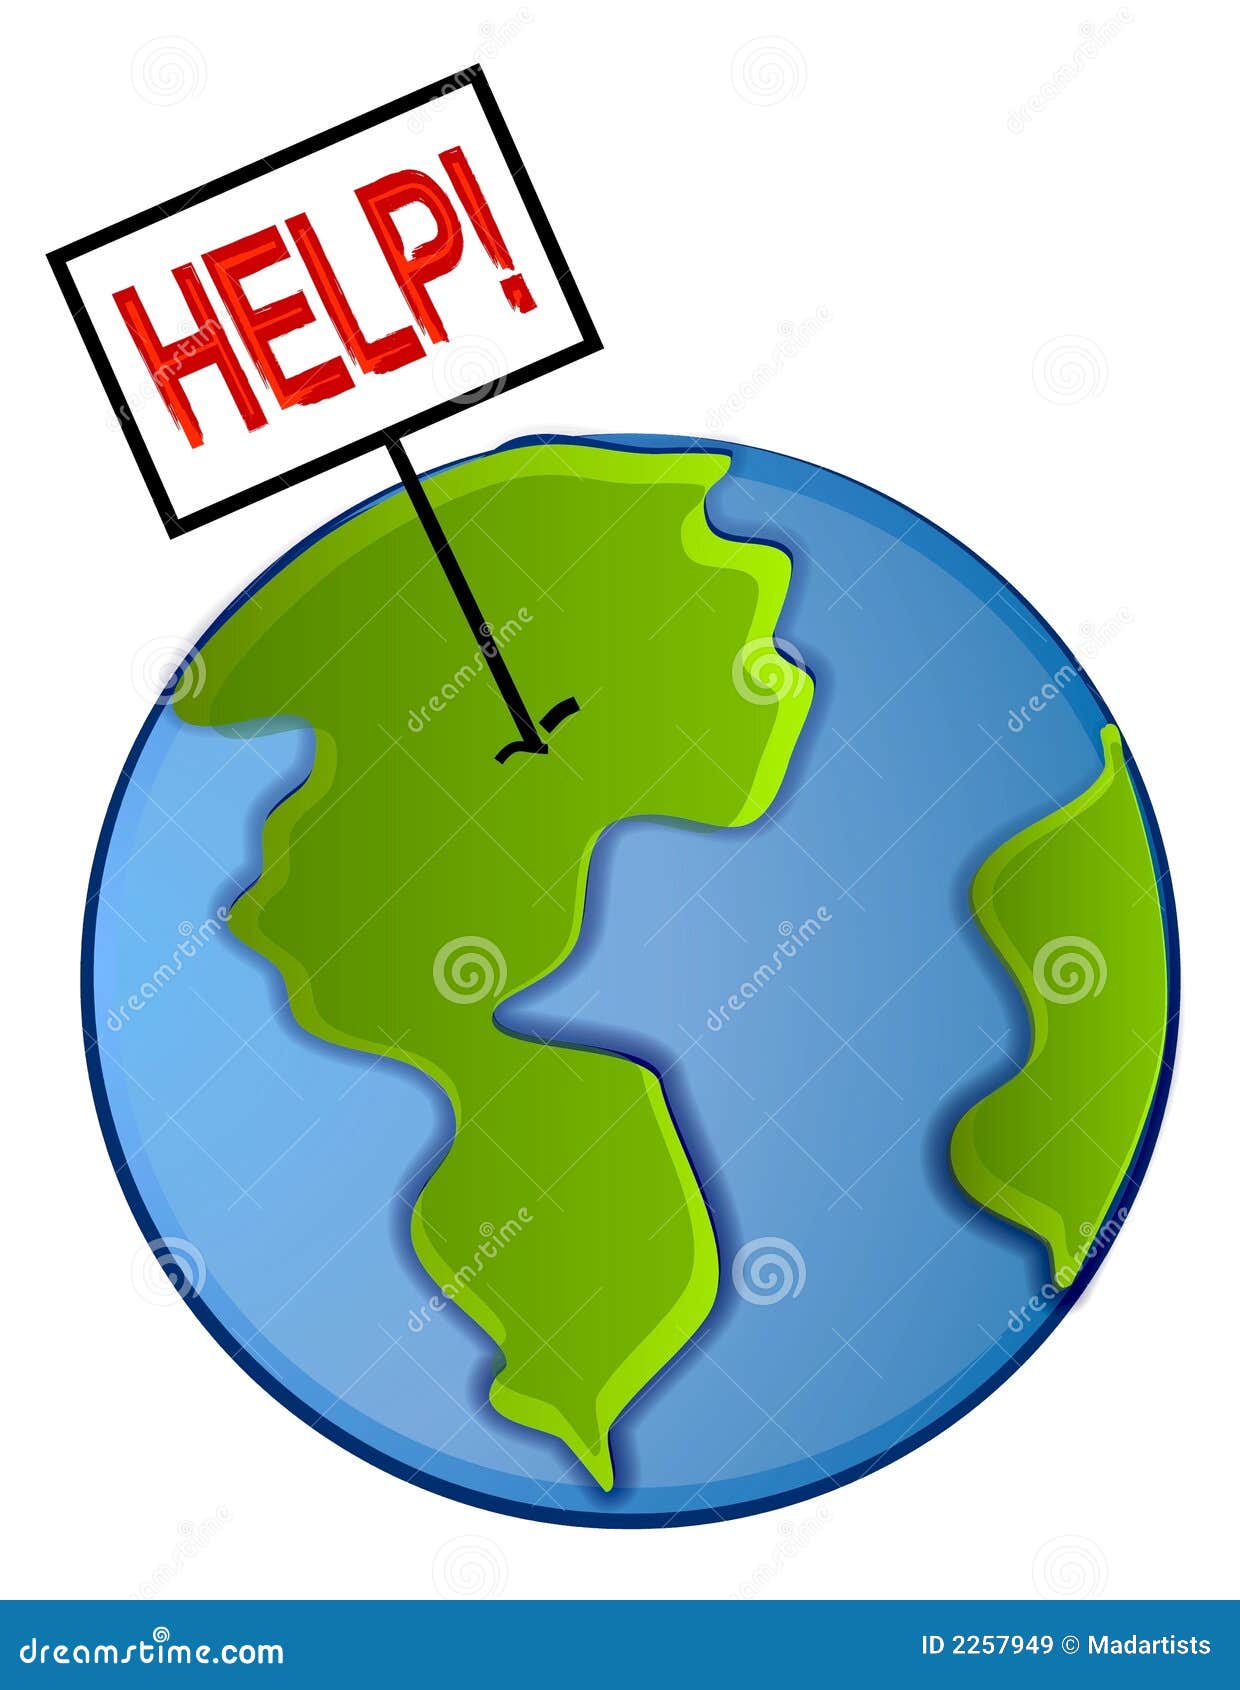 clipart images on save earth - photo #6